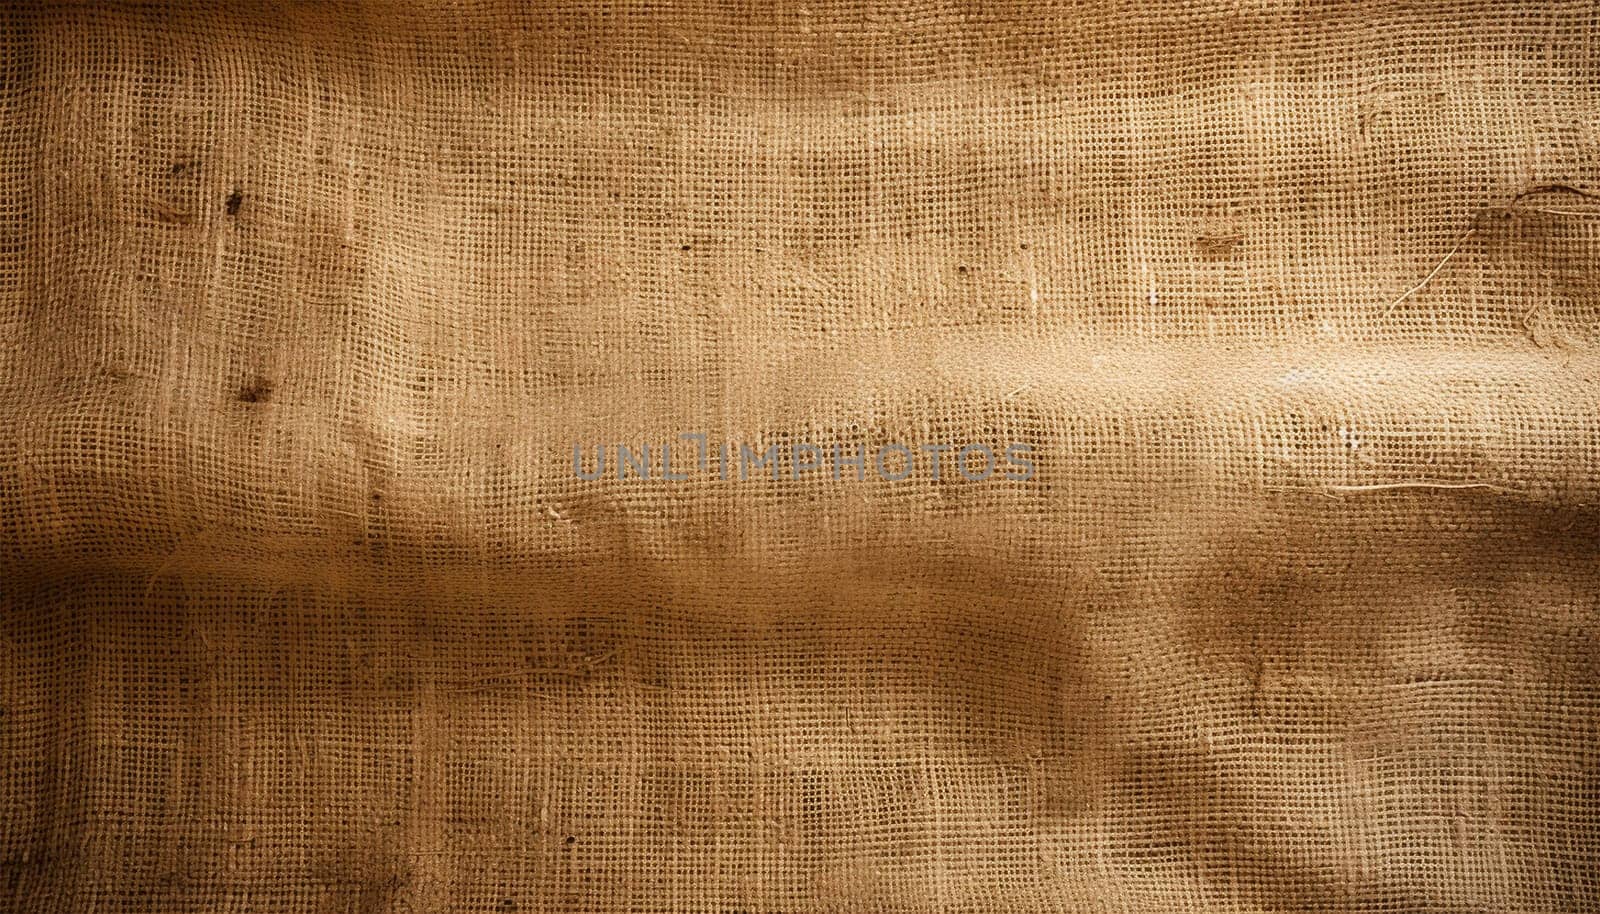 Burlap brown natural Cream French Linen Texture Border Background. Old Ecru Flax Fibre Seamless Pattern. Organic Yarn Close Up Weave Fabric Ribbon Trim Banner. Sack Cloth Packaging, Canvas Edging. by Annebel146